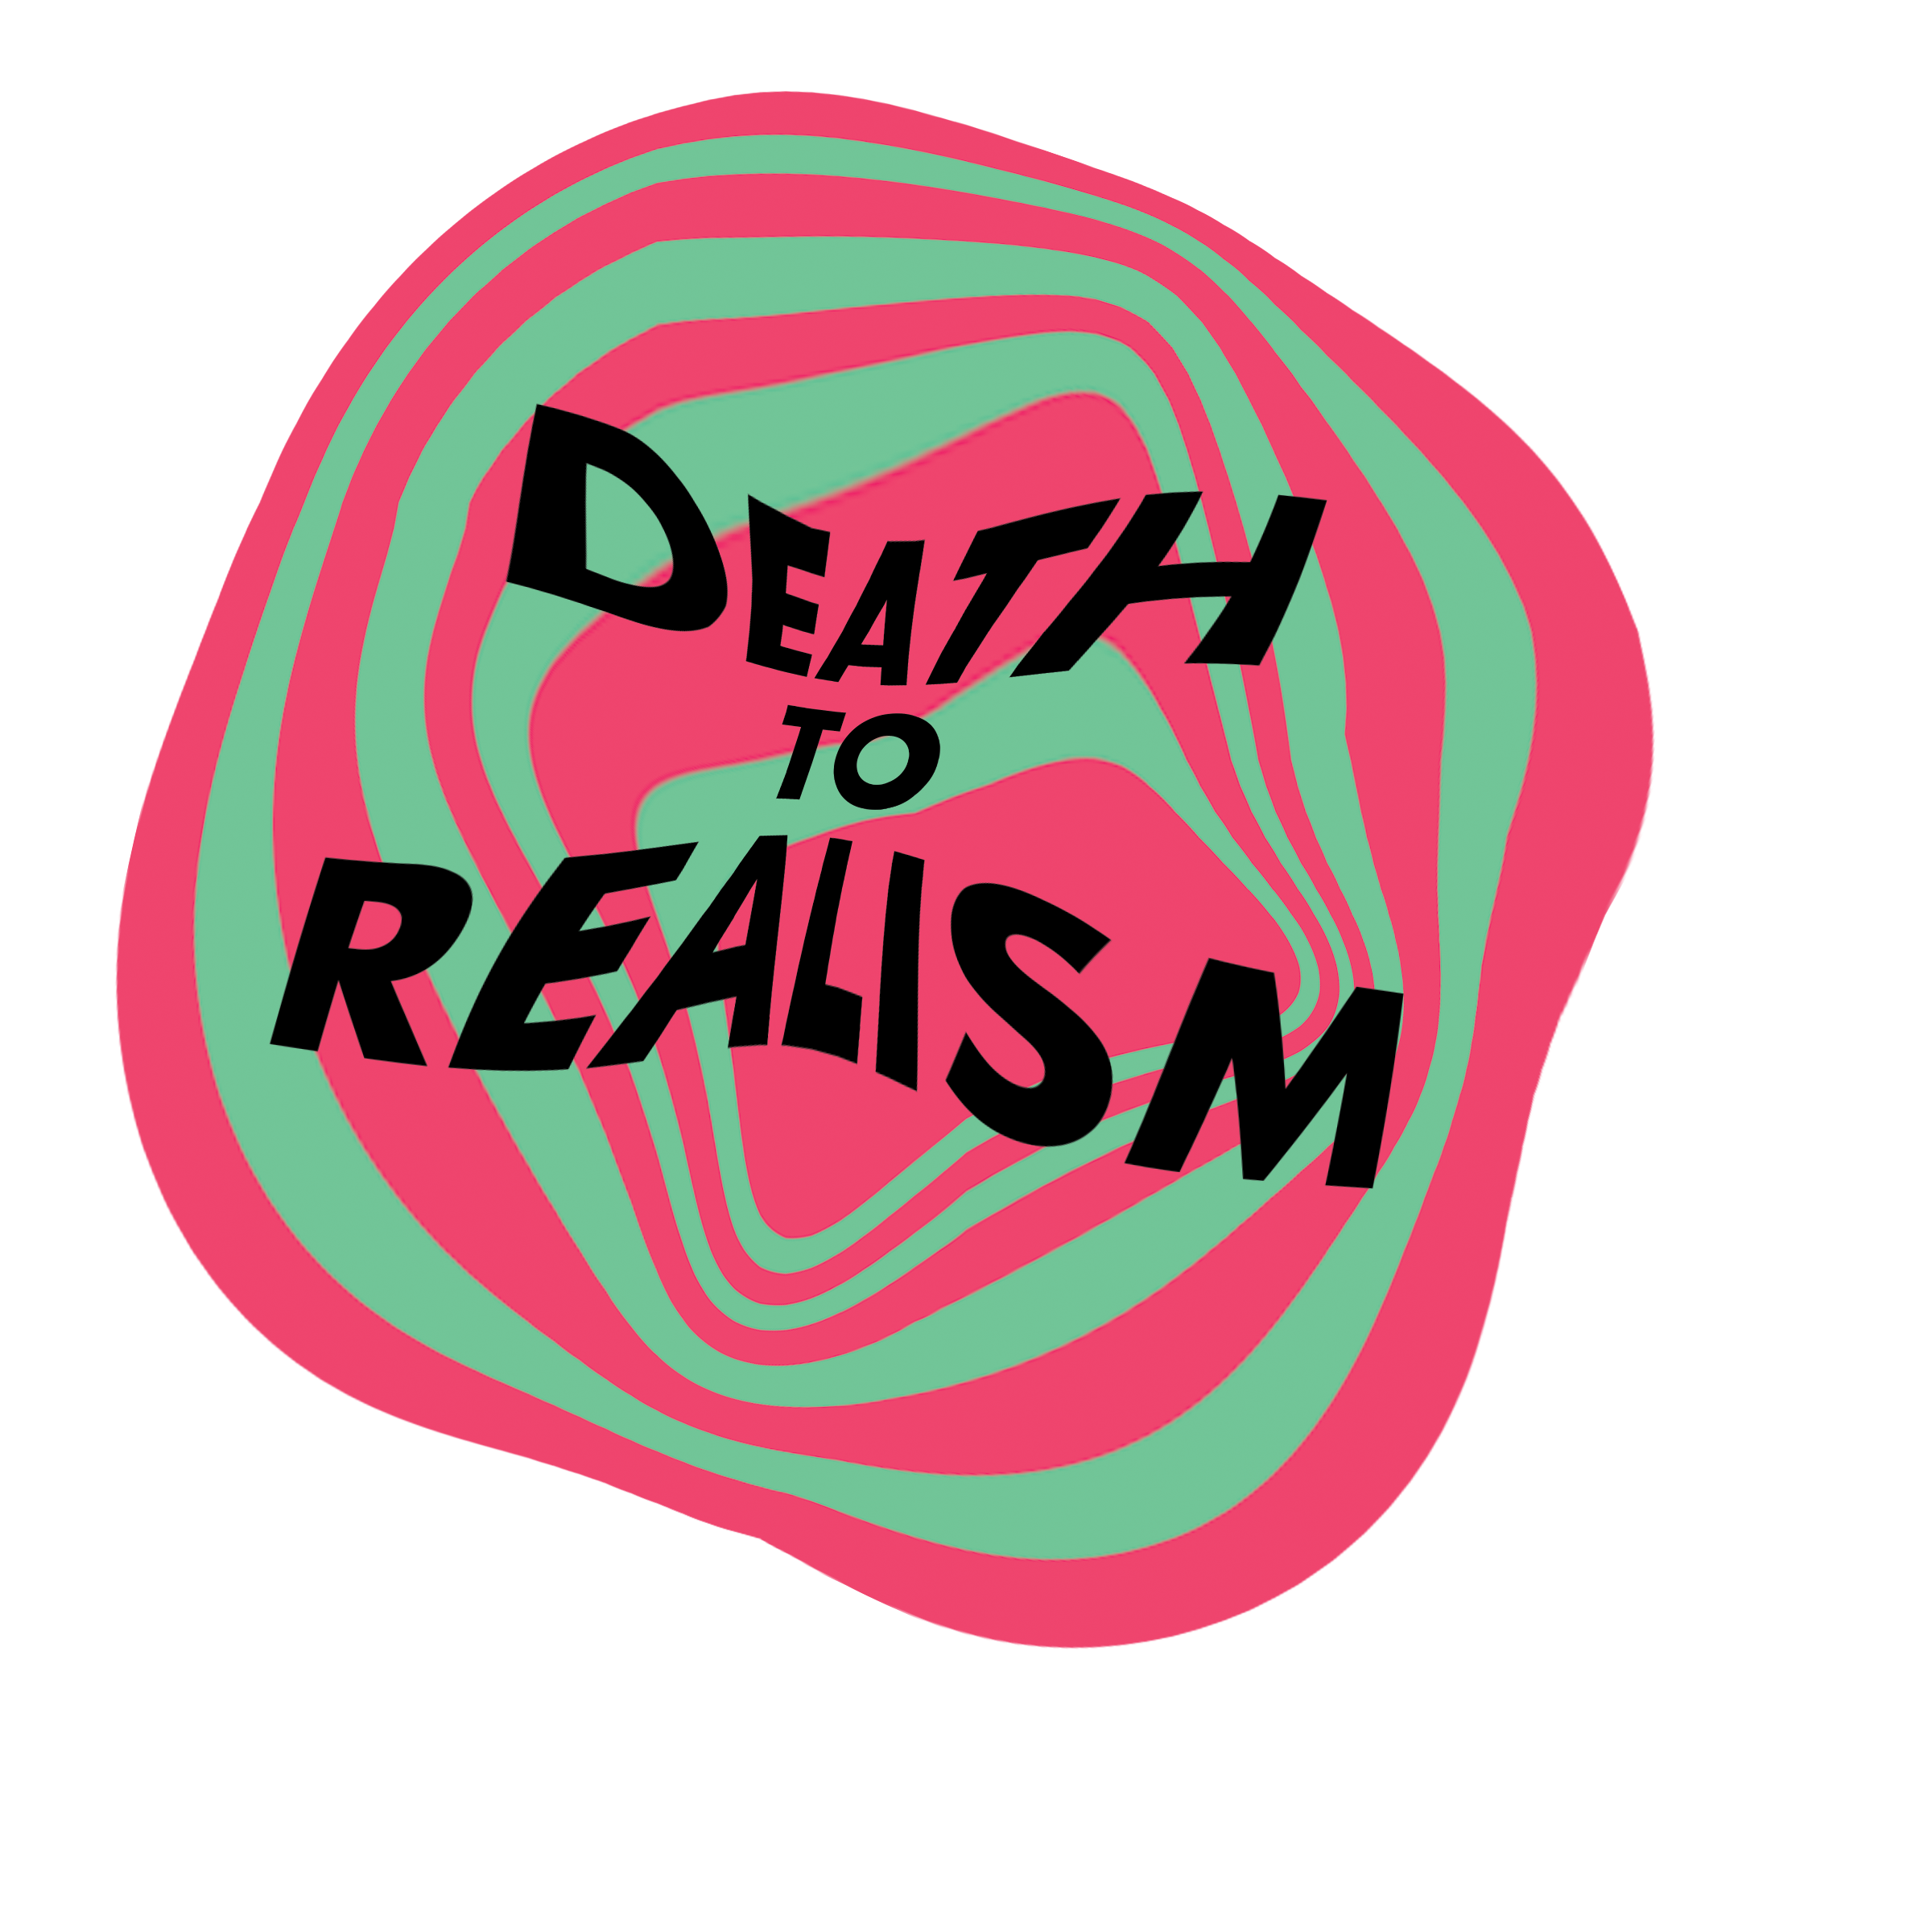 Death to Realism